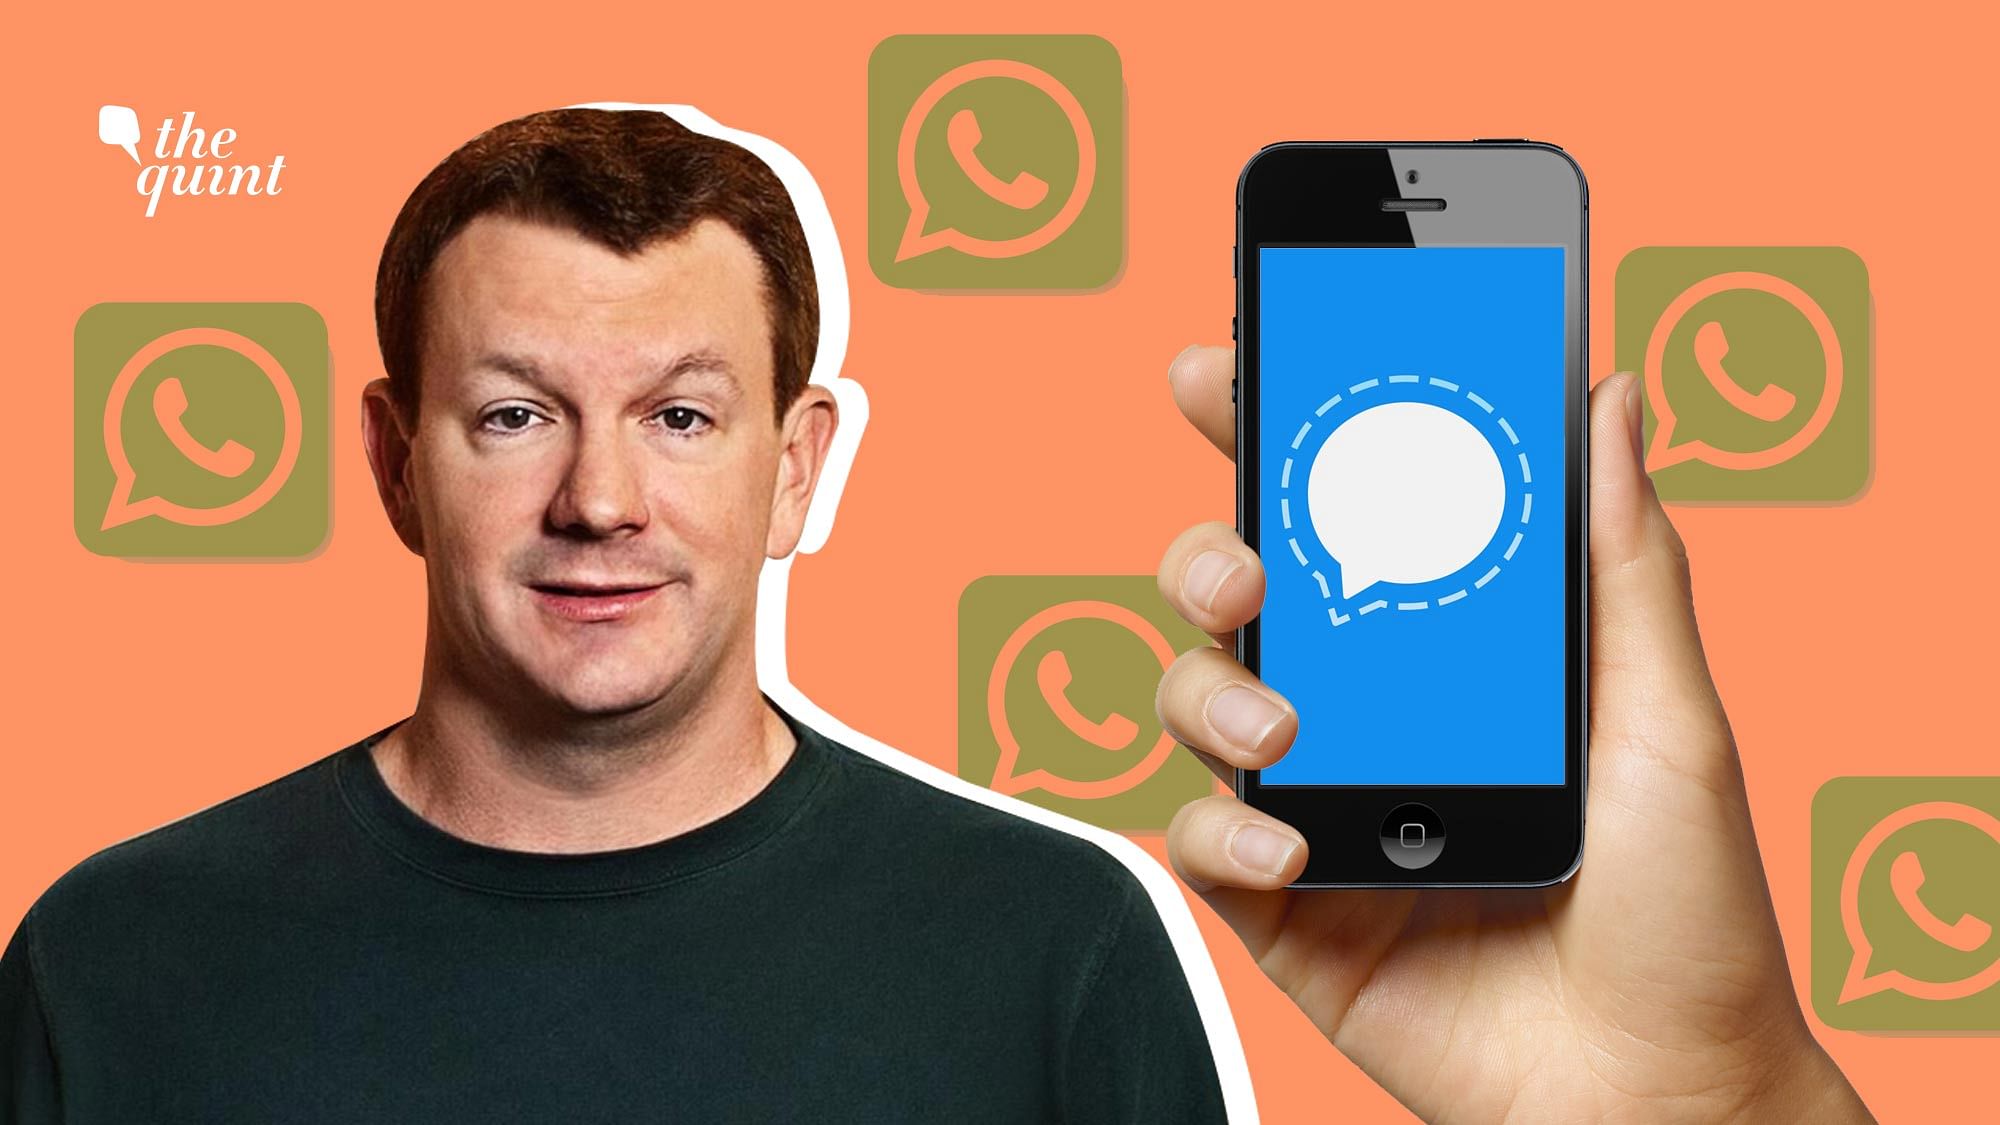 Former WhatsApp’s co-founder Brian Acton quit the app after Facebook’s acquisition and co-founded the Signal Foundation.